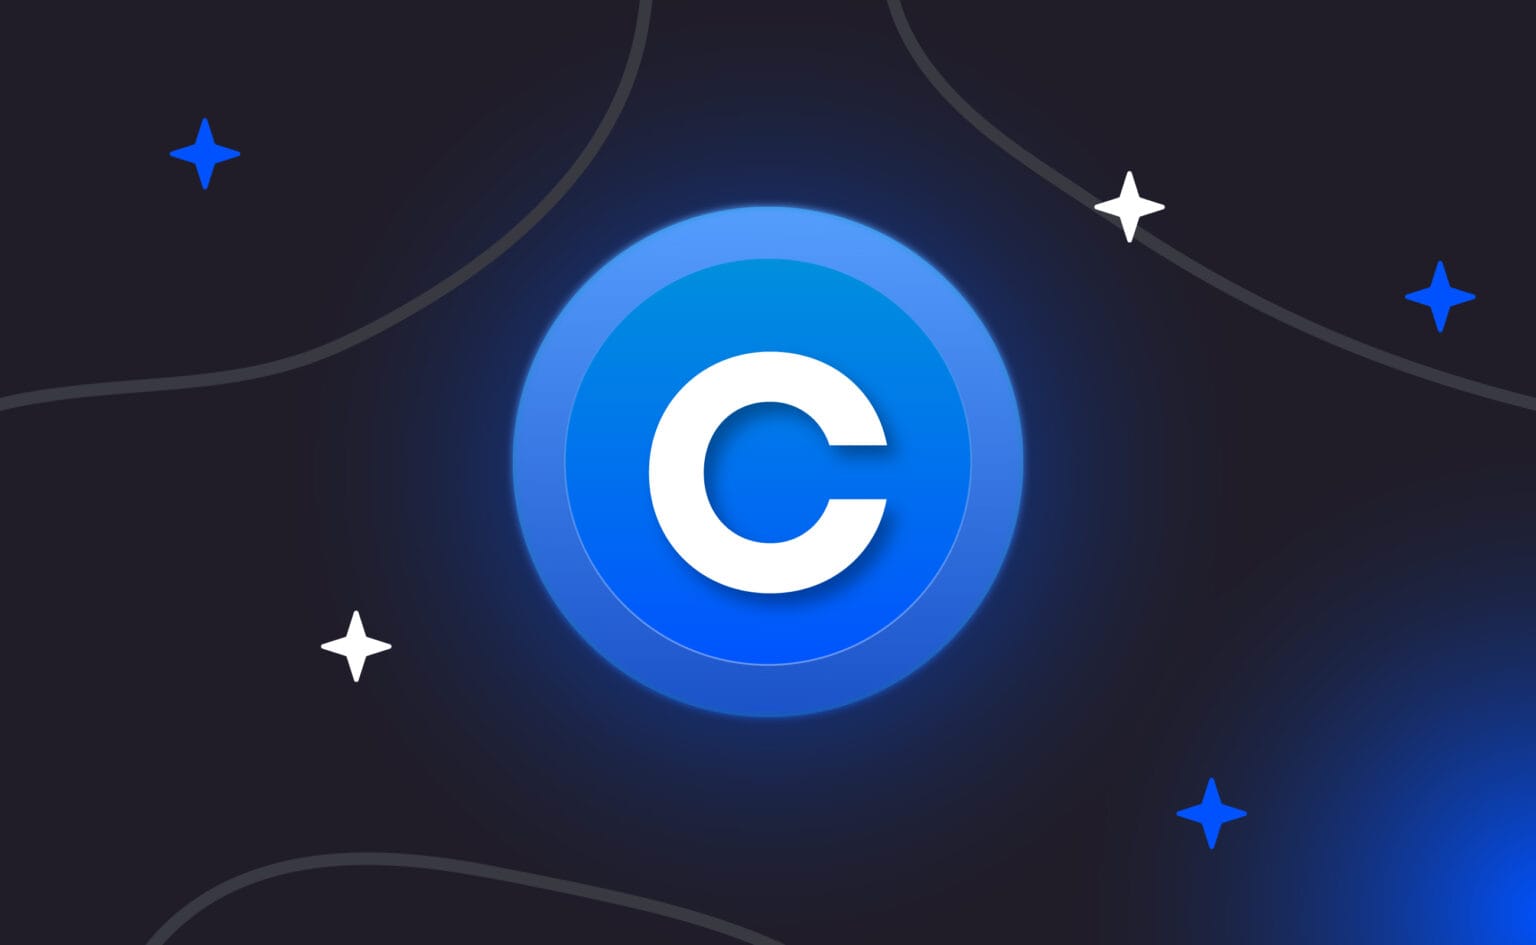 The Coinbase client was included in the top 100 most popular apps in the App Store